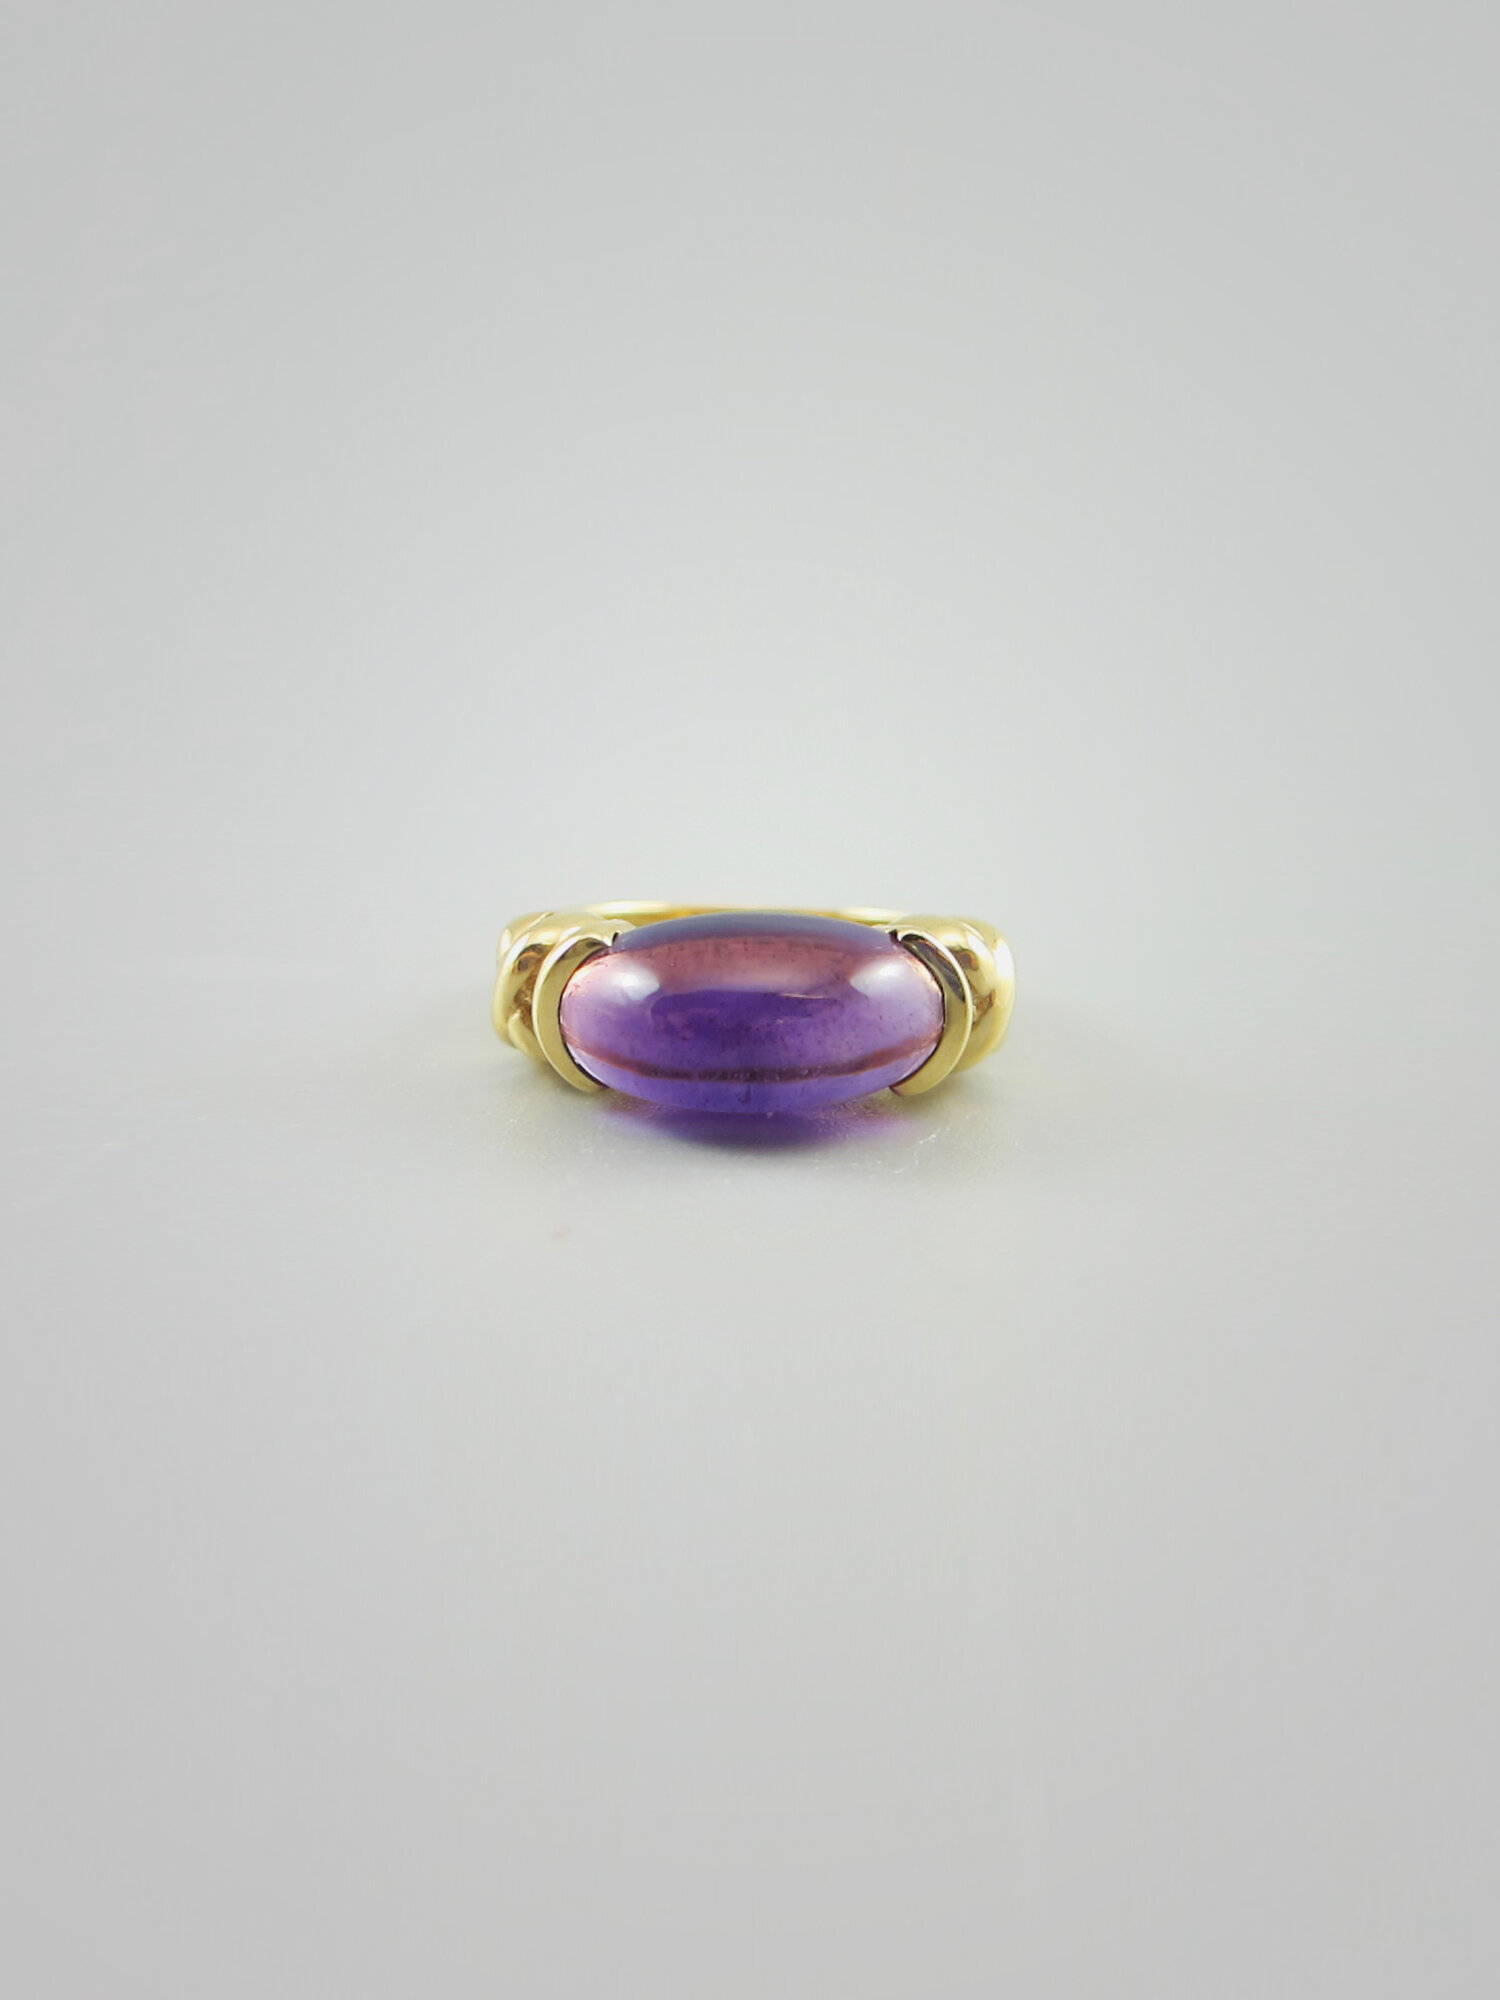 prins cultuur dienblad Amethyst Cabochon Ring — Joel Bagnal Goldsmiths & Jewelers Hand-Crafted  Jewelry Since 1976